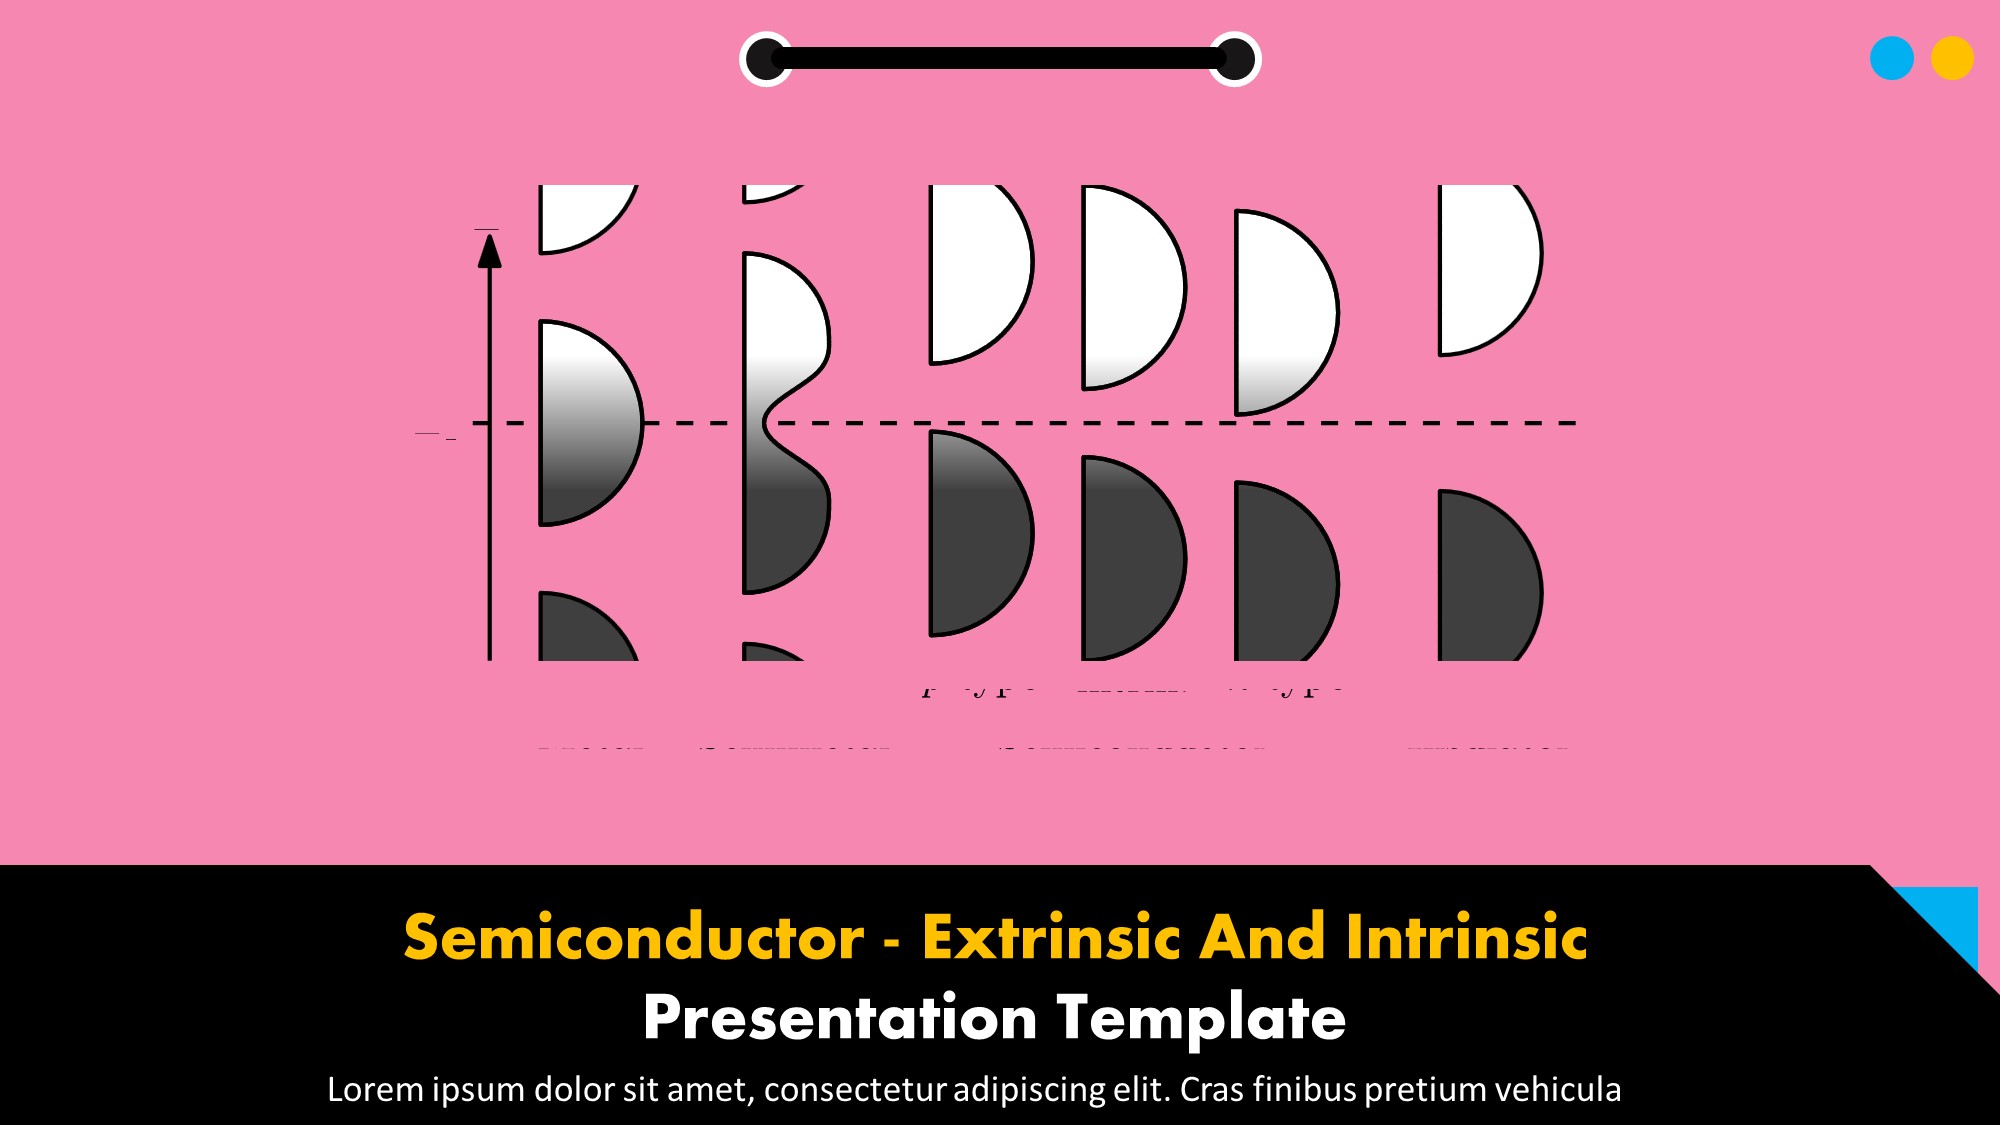 Semiconductor - Extrinsic And Intrinsic